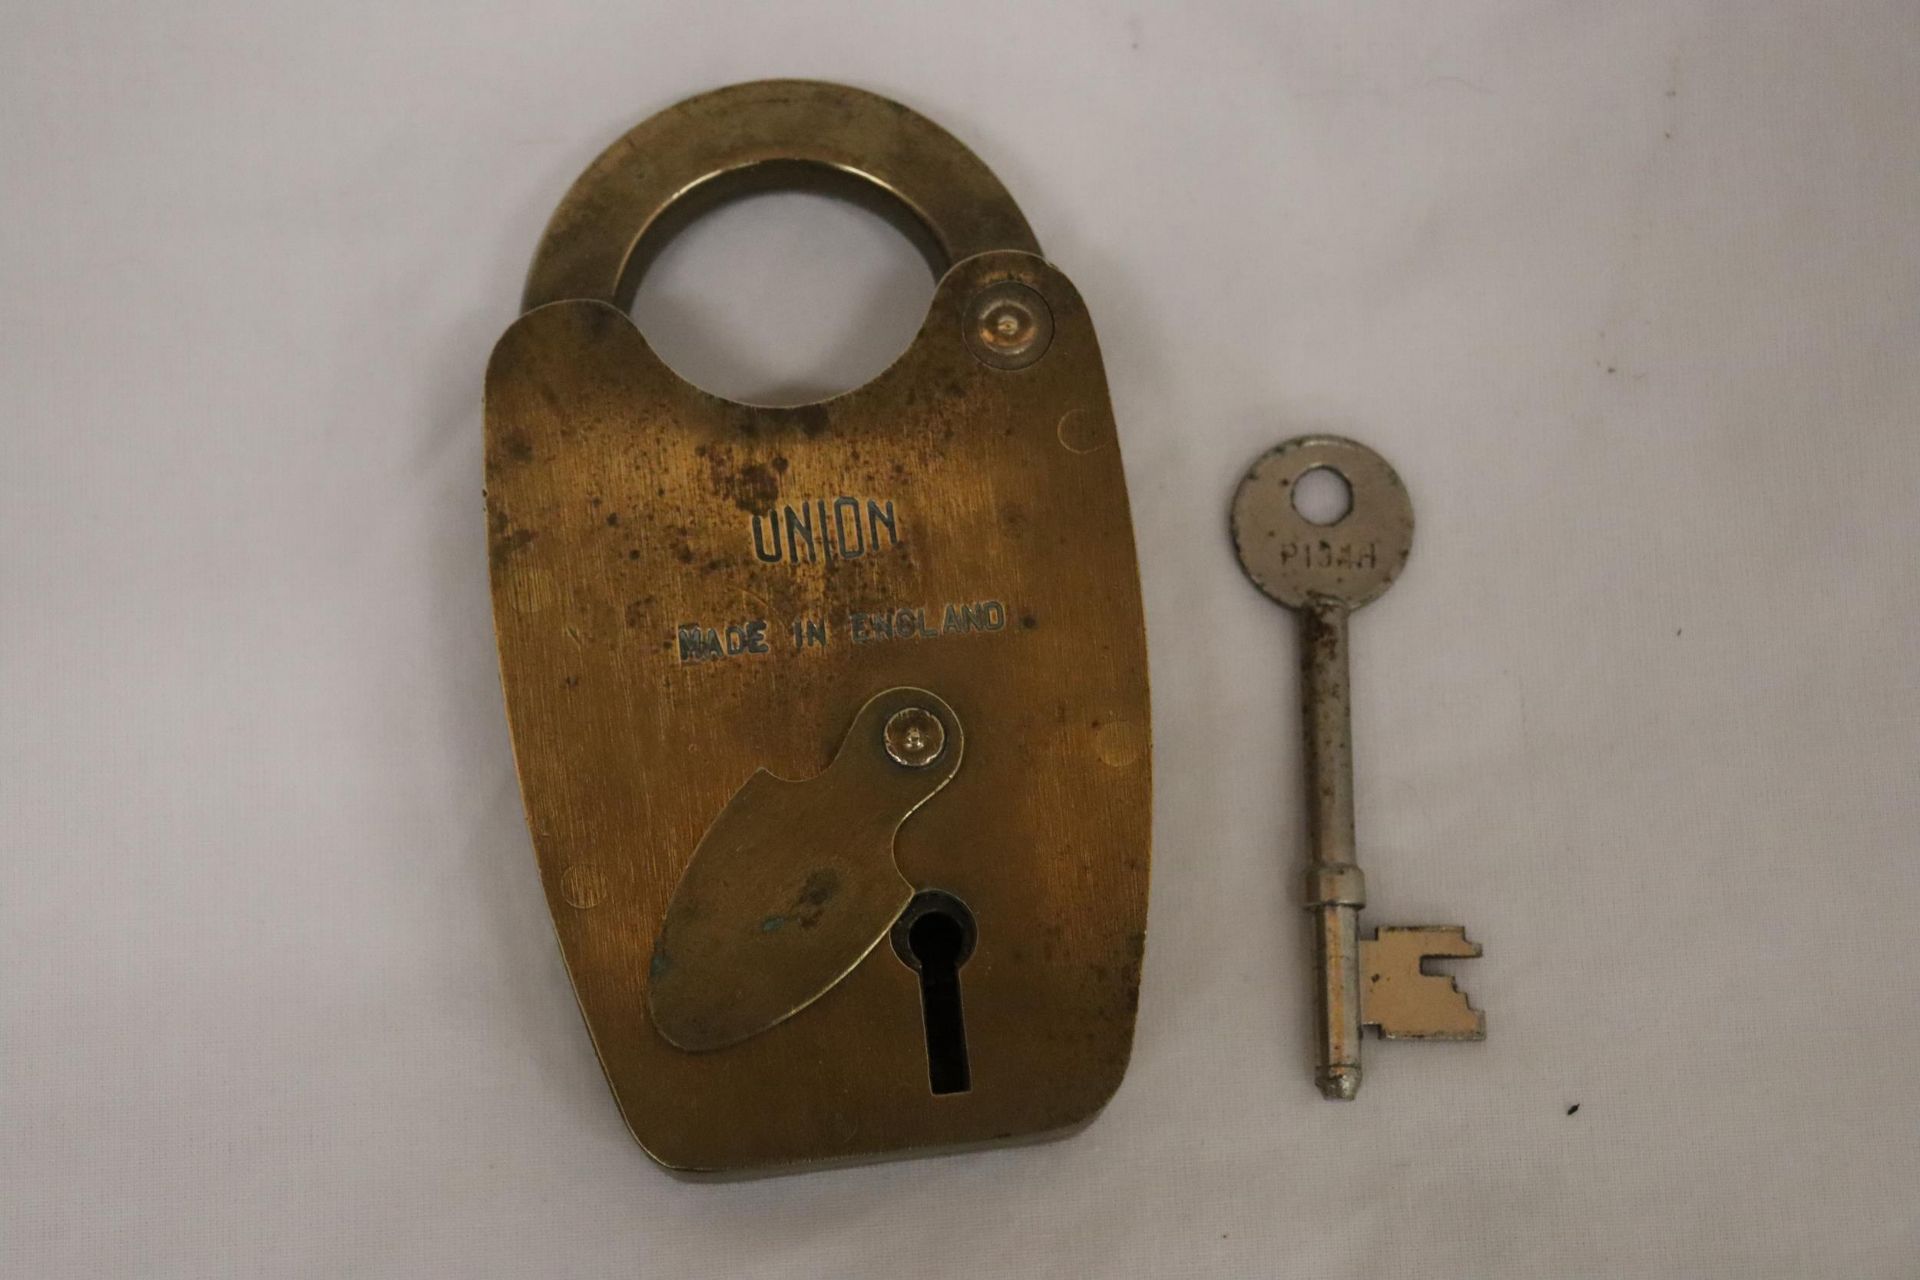 A VINTAGE BRASS UNION PADDLOCK AND KEY - 5 INCH TALL